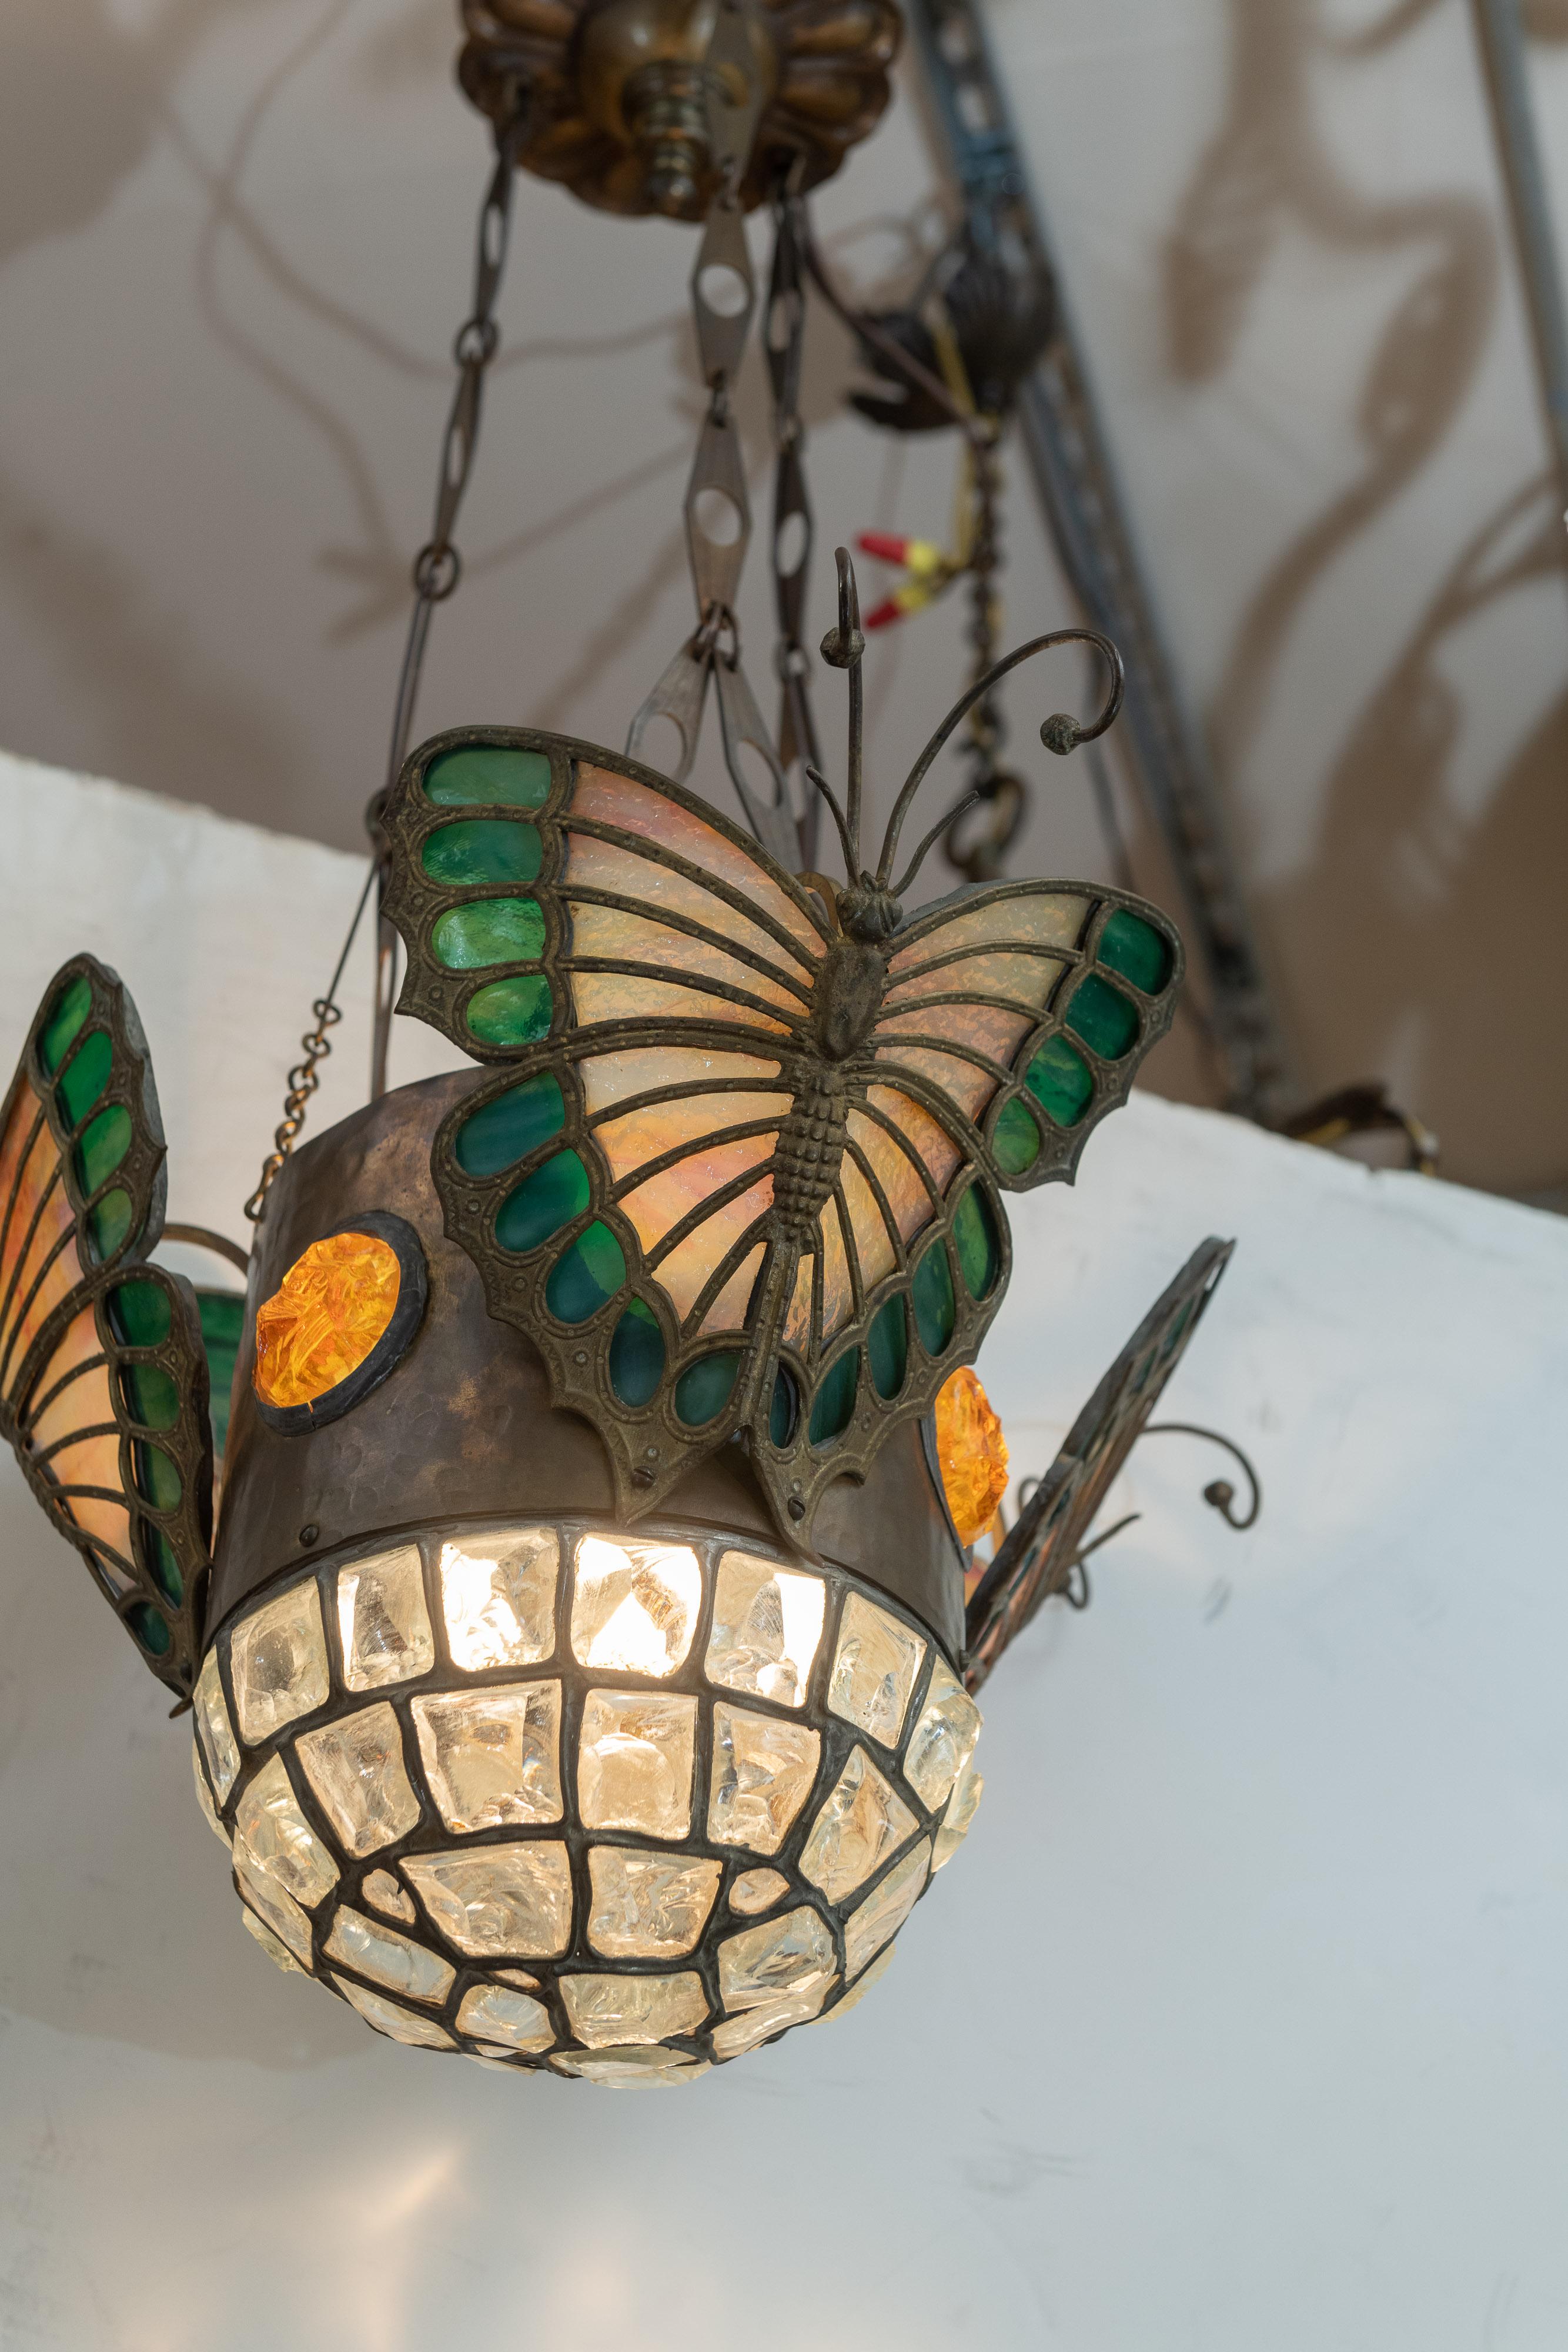 This is quite an exceptional piece of lighting. We purchased it right out of the home of a 93 year old collector who was moving to an assisted living home. We were very lucky to get the call first. I have seen lots of chunk glass lighting, but